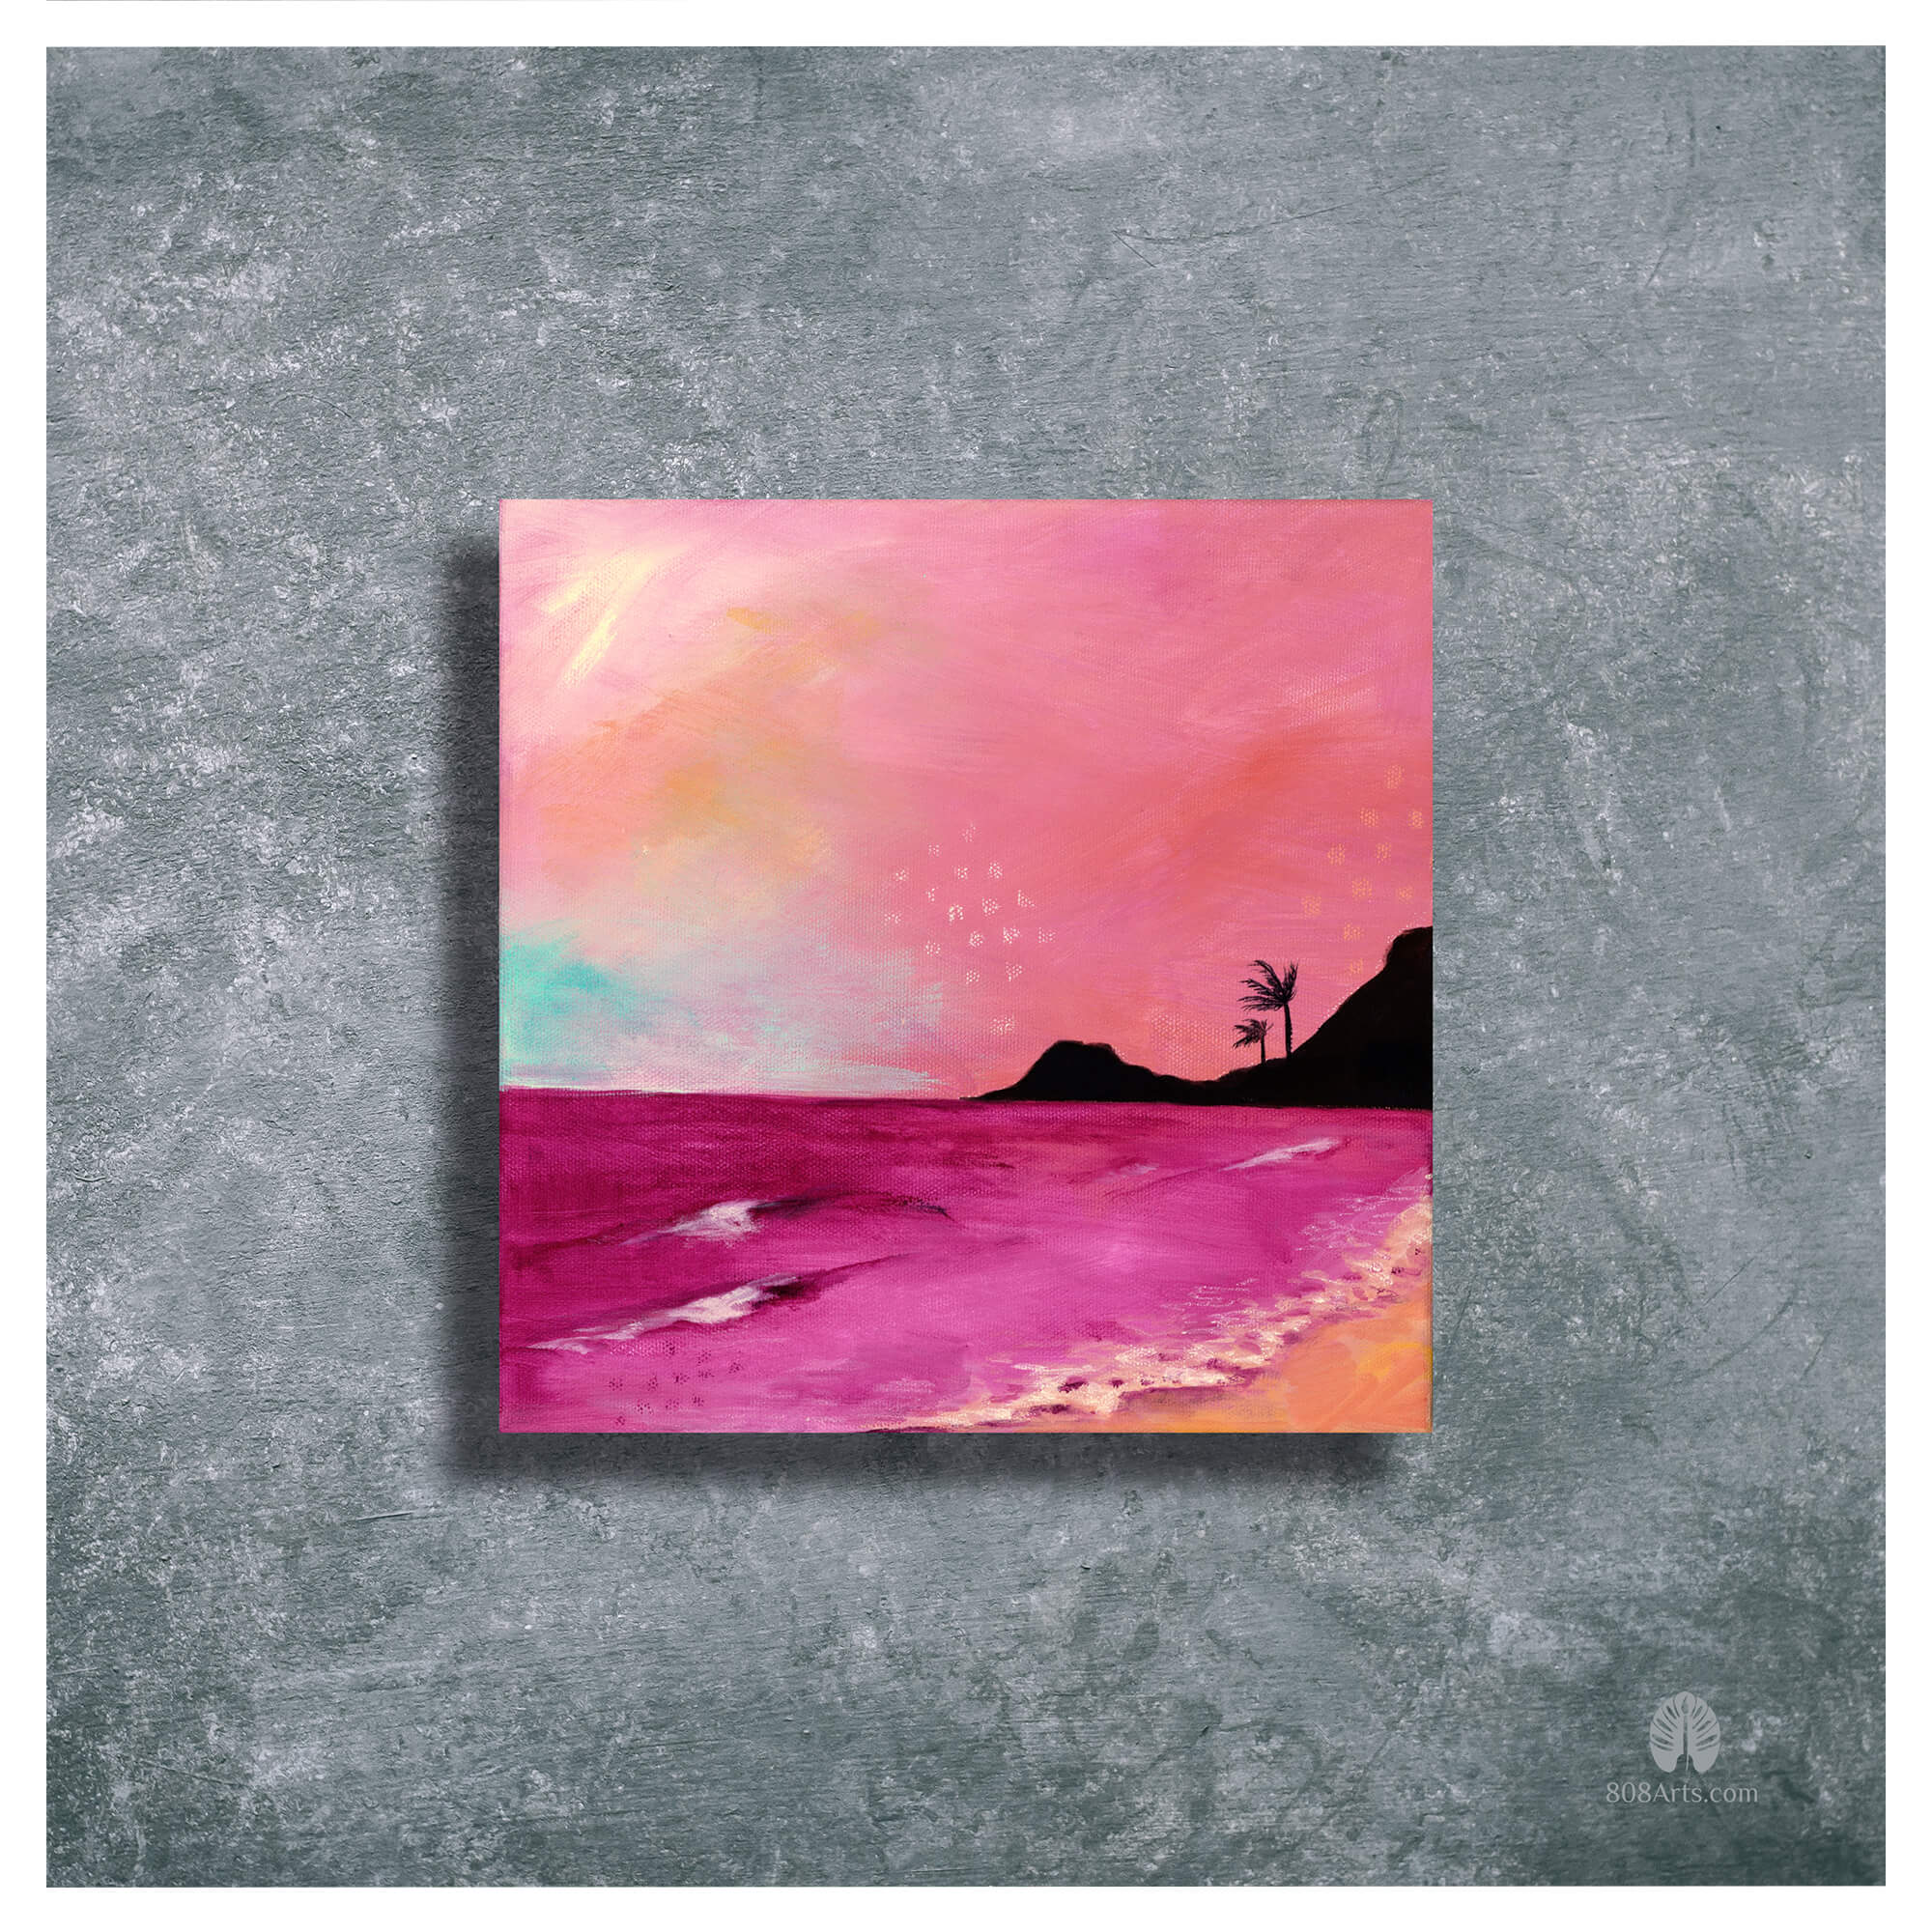 A seascape with different shades of pink by Hawaii artist Lindsay Wilkins